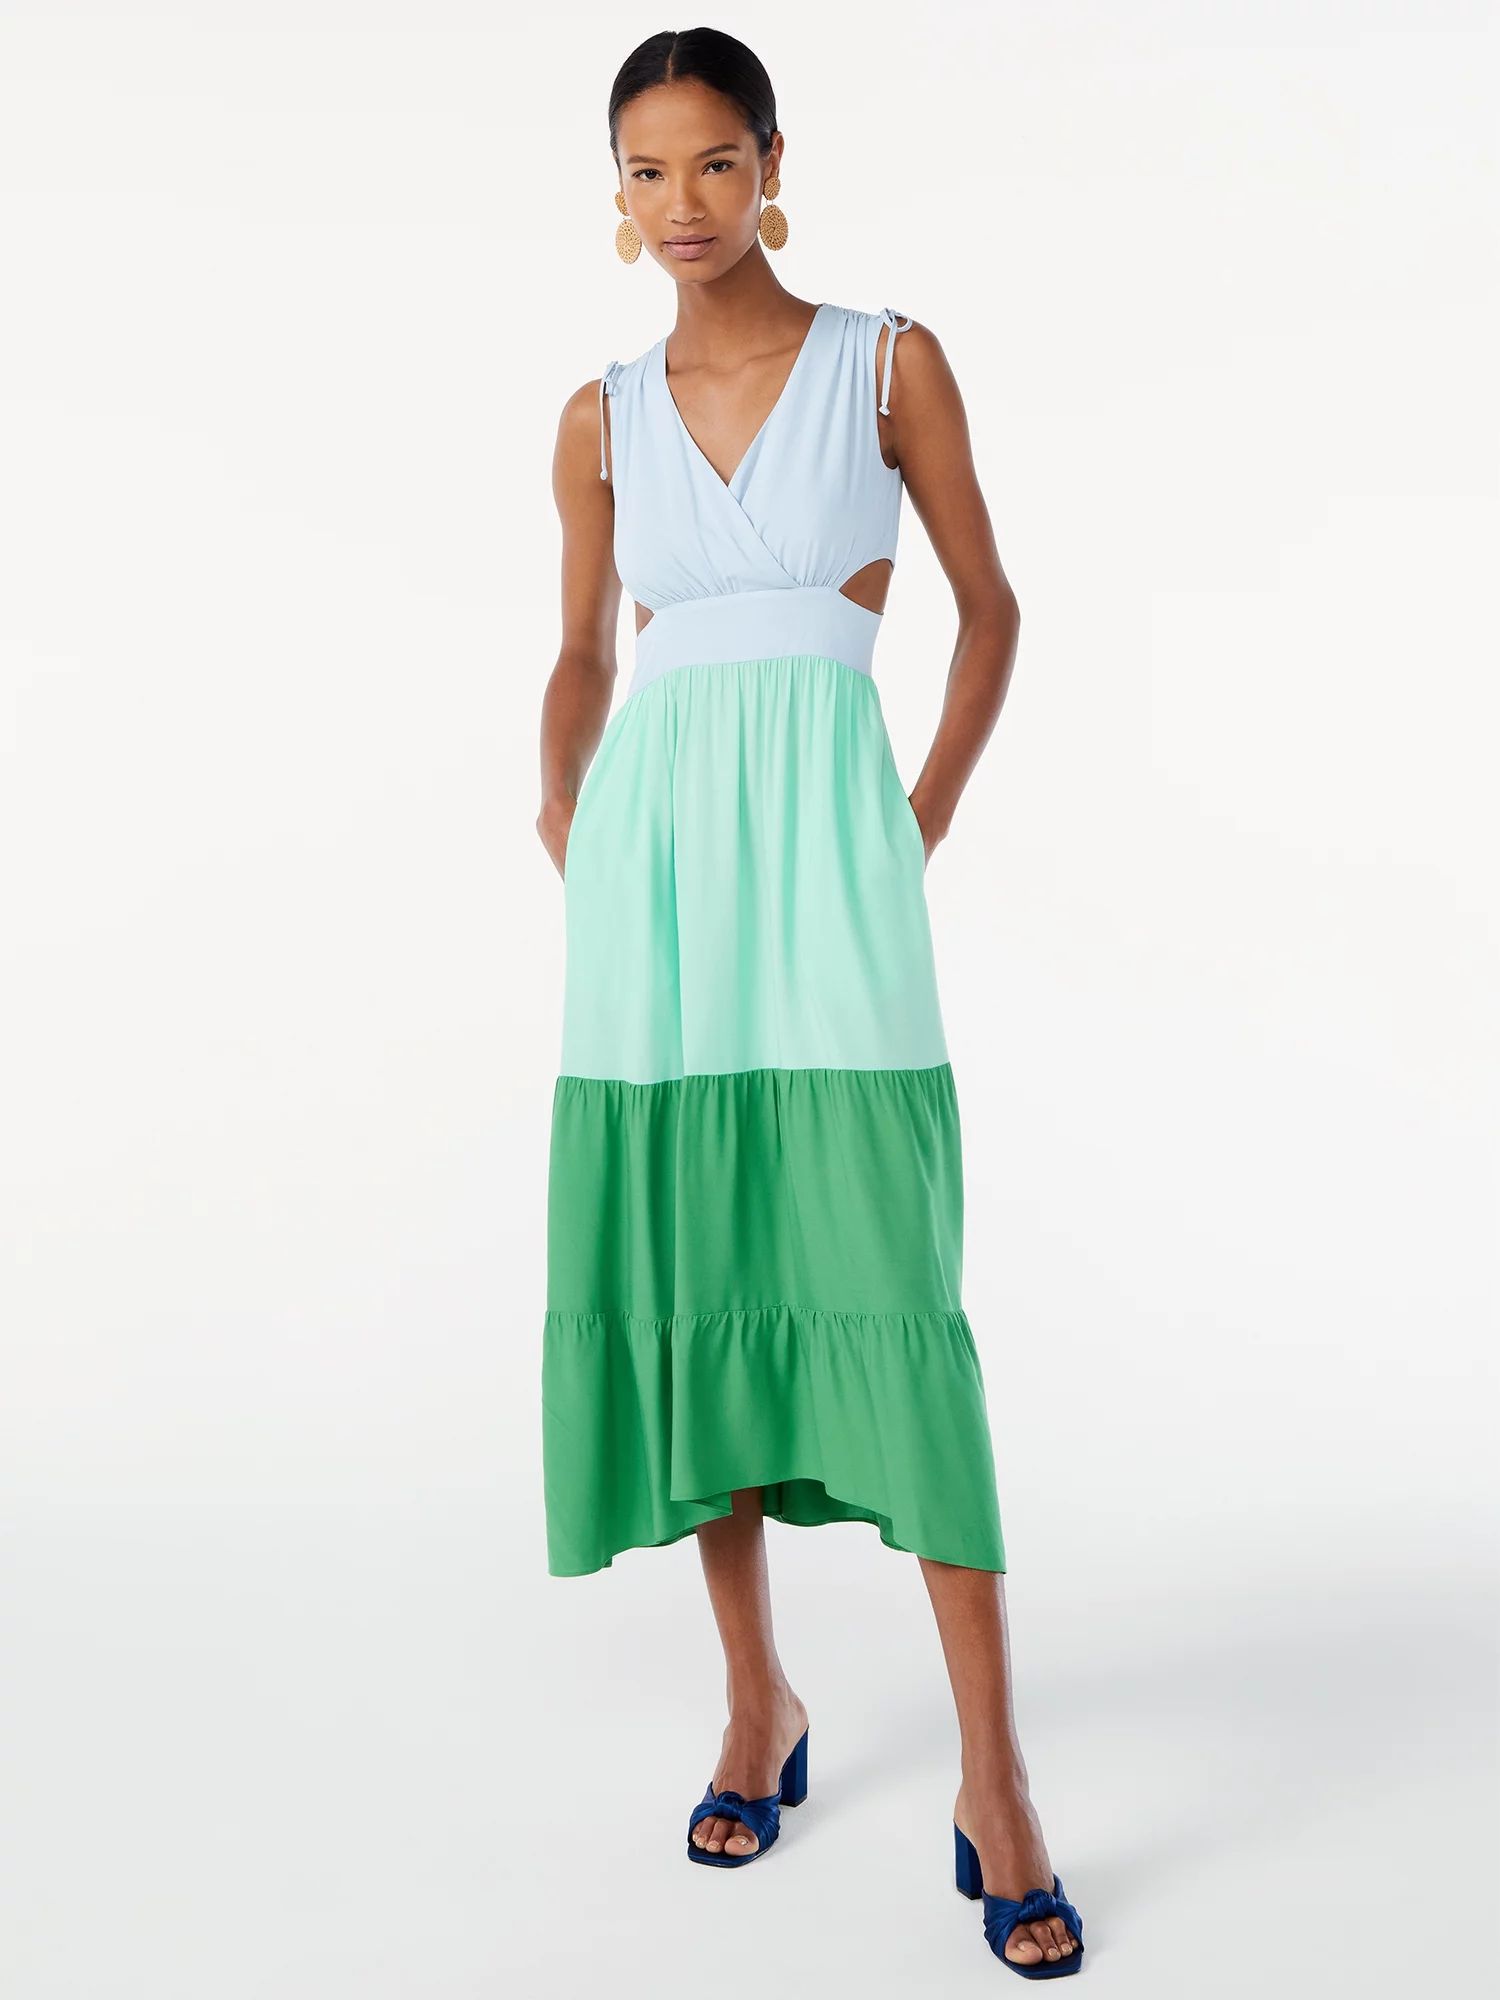 Scoop Women's Sleeveless Color Block Maxi Dress with Side Cutouts | Walmart (US)